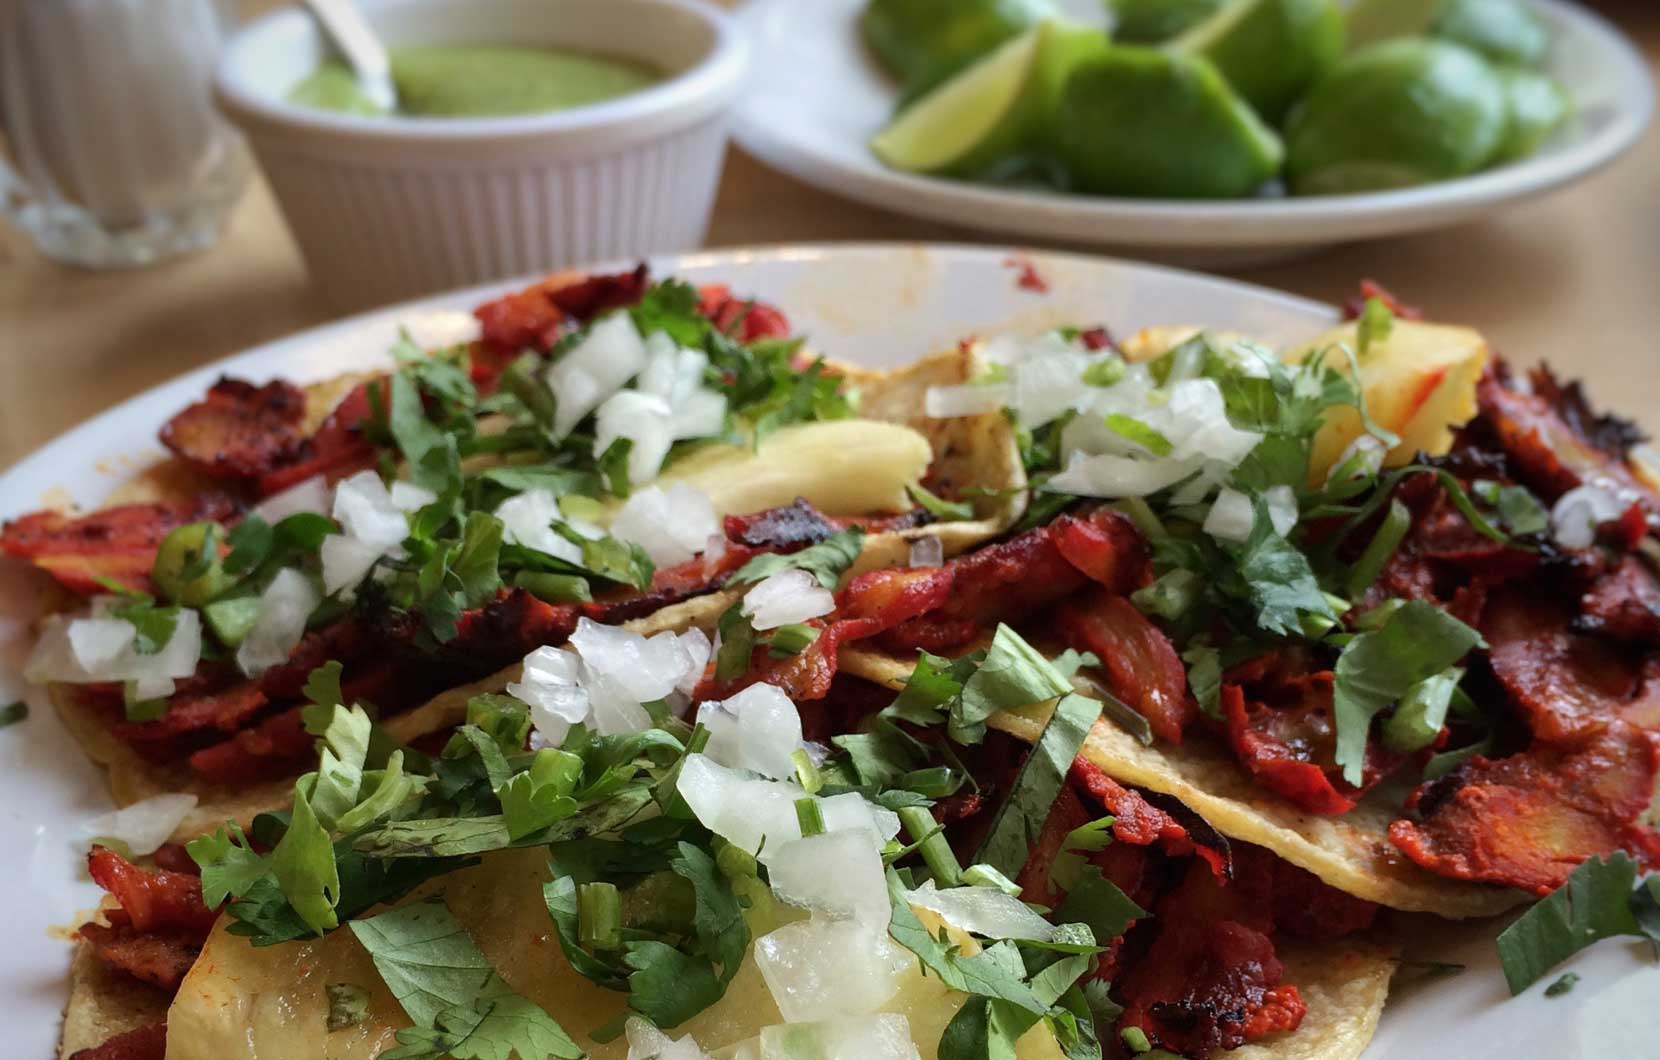 Make sure to try some authentic Mexican tacos, and some even more adventurous fare!